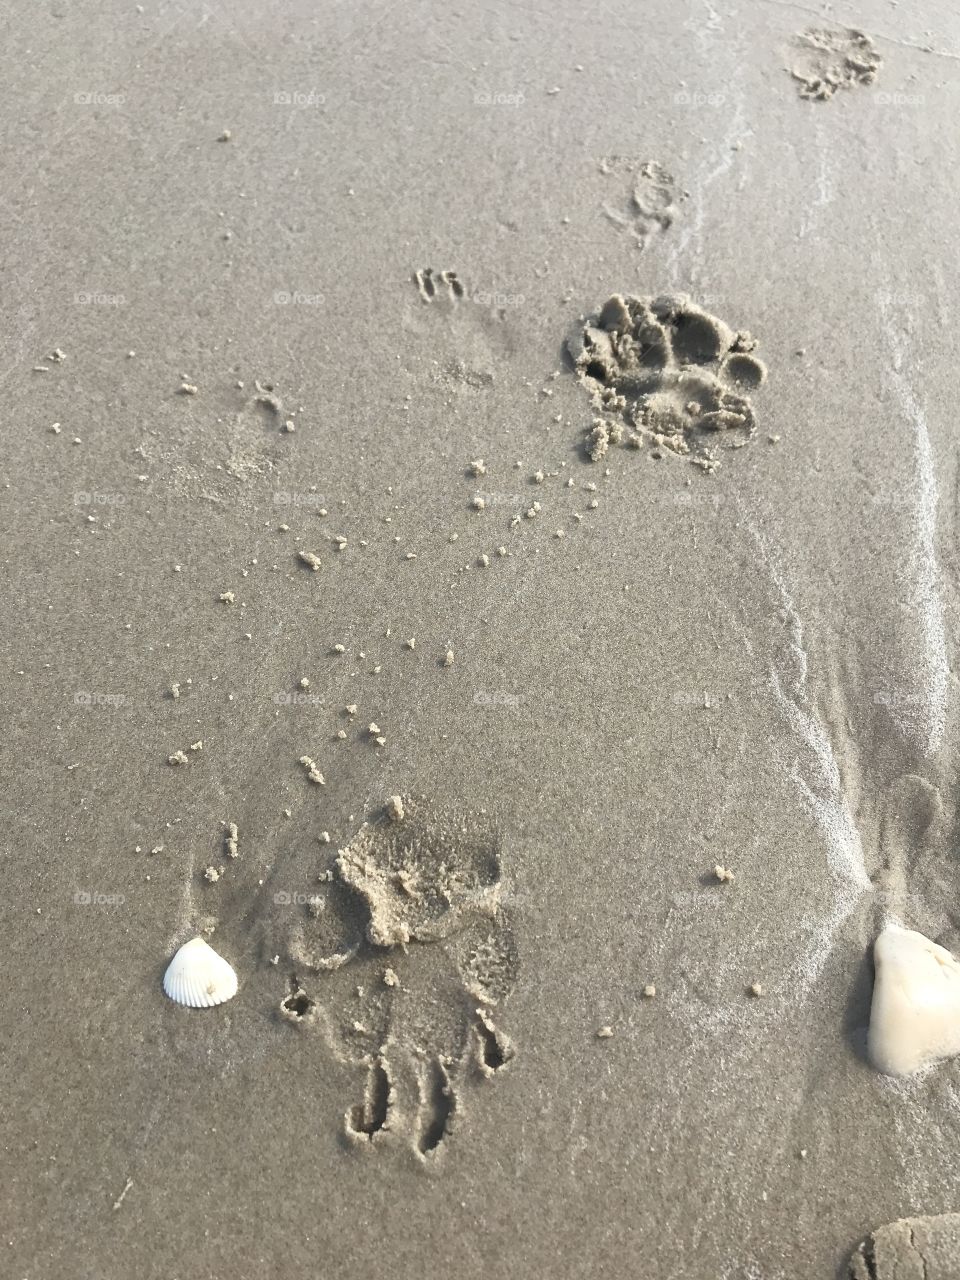 Our memories by the ocean will linger on, long after our paw prints in the sand are gone.